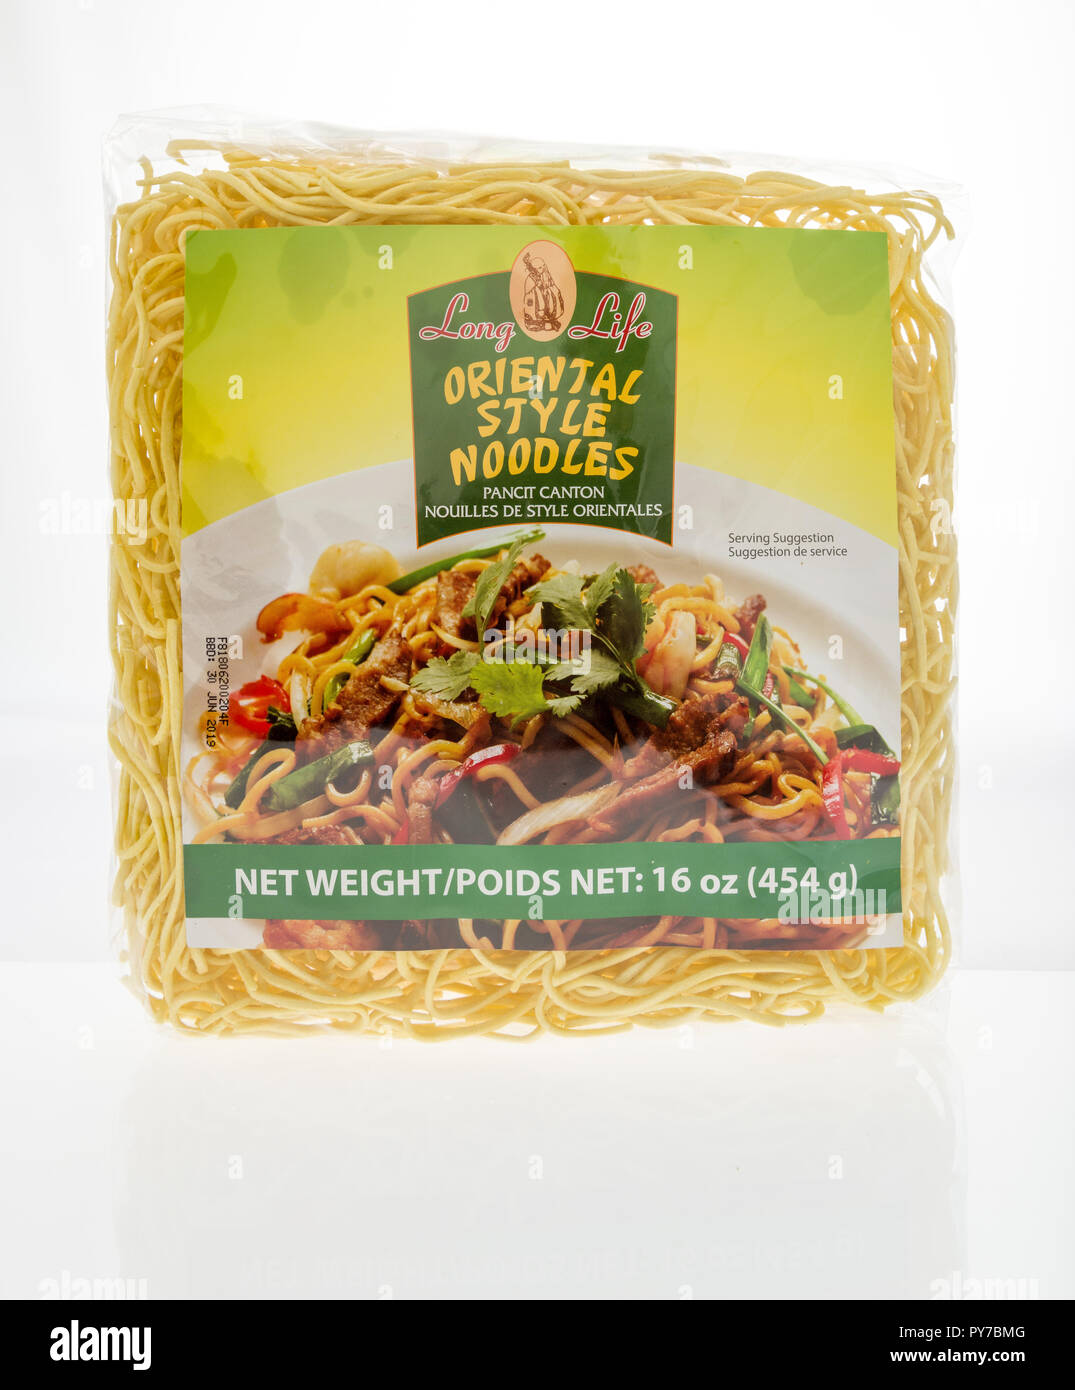 Winneconne, WI - 10 October 2018: A package of  Long Life oriental sytle noodles on an isolated background Stock Photo